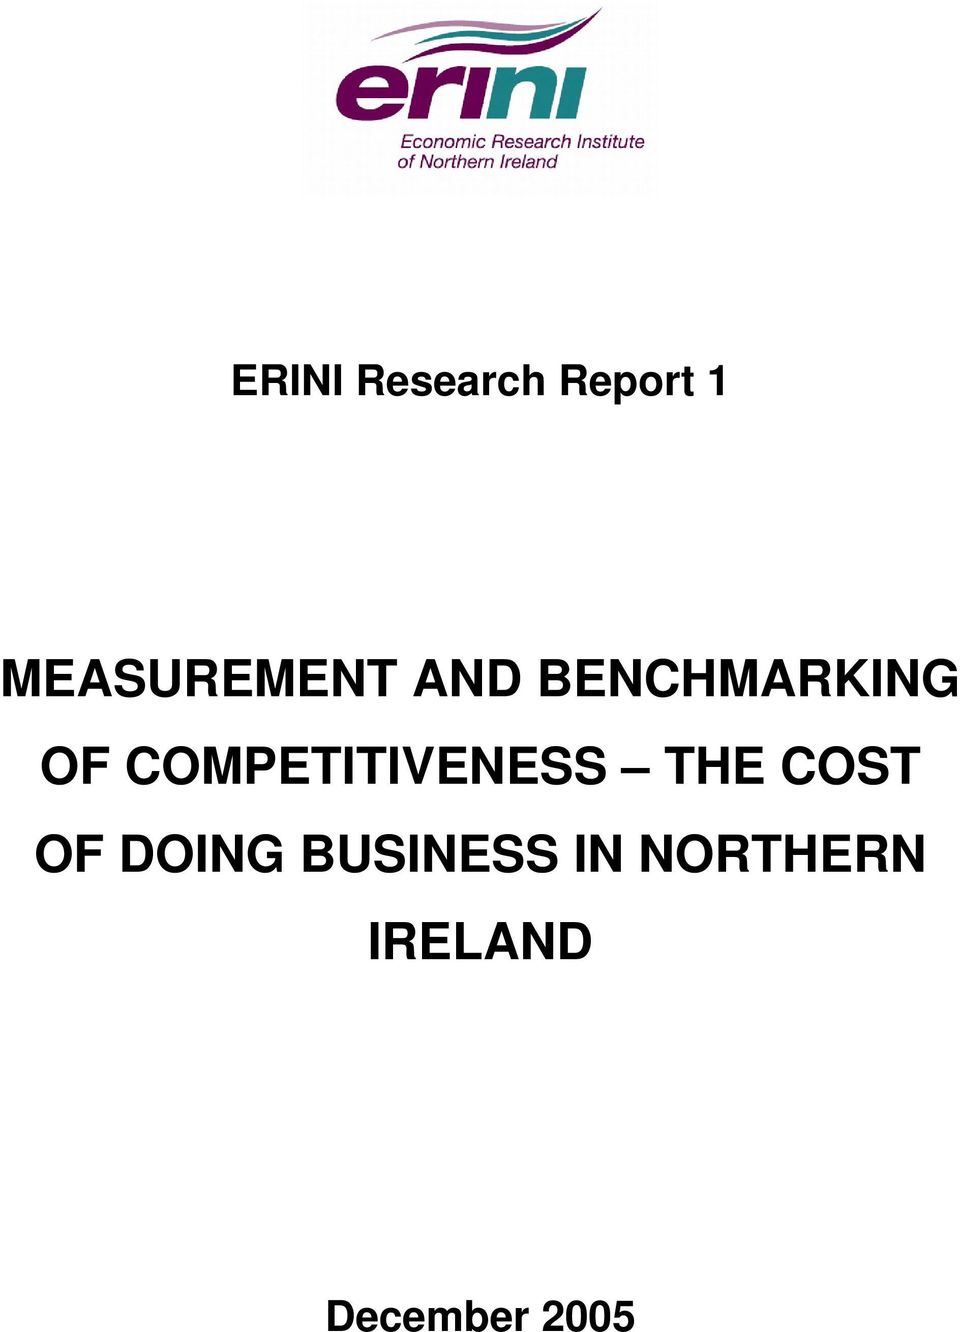 COMPETITIVENESS THE COST OF